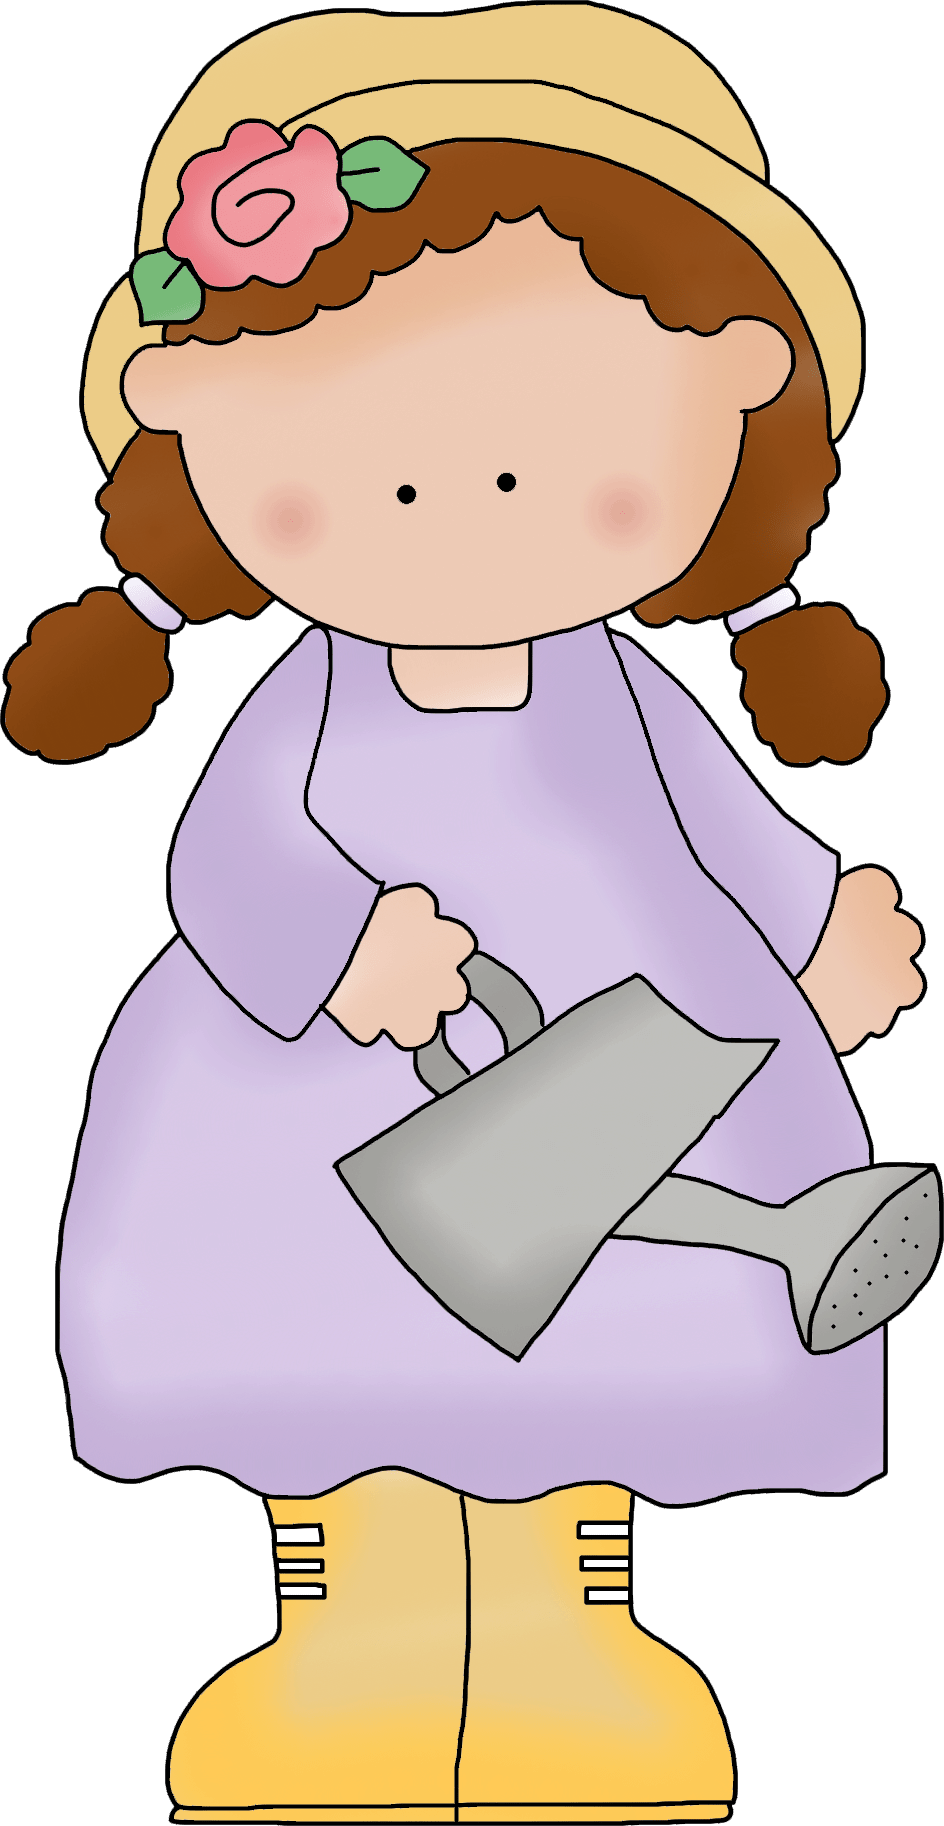 FDL-CsCA-Mary-Mary-Quite-Contrary-1 Teaching with Nursery Rhymes